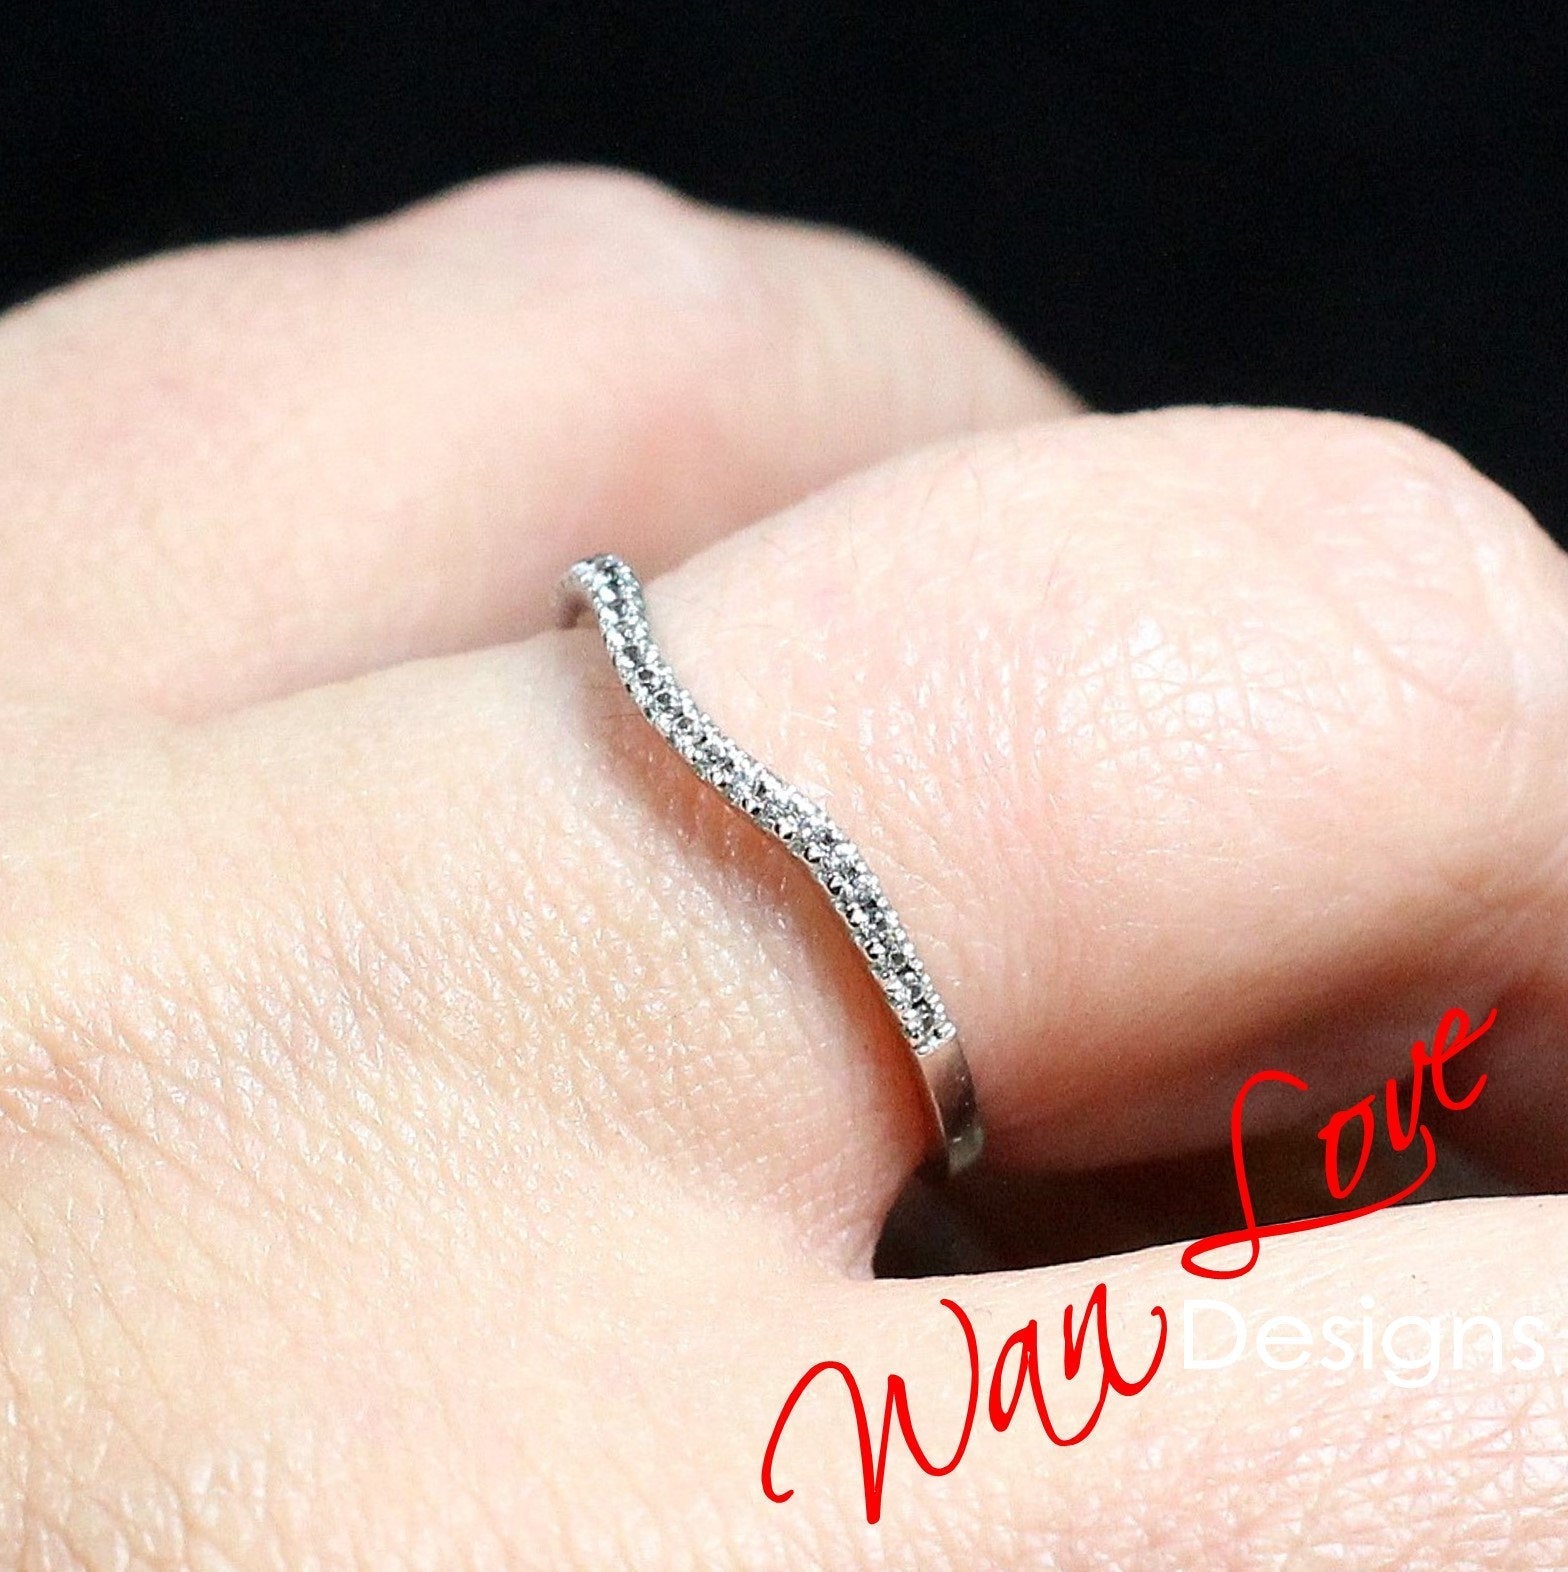 Sample Sale Ready to ship-White Sapphire Contoured Half Eternity Wedding Band-Stackable .22ct 925 Silver Rhodium-Sz 6.5-Anniversary Gift Wan Love Designs